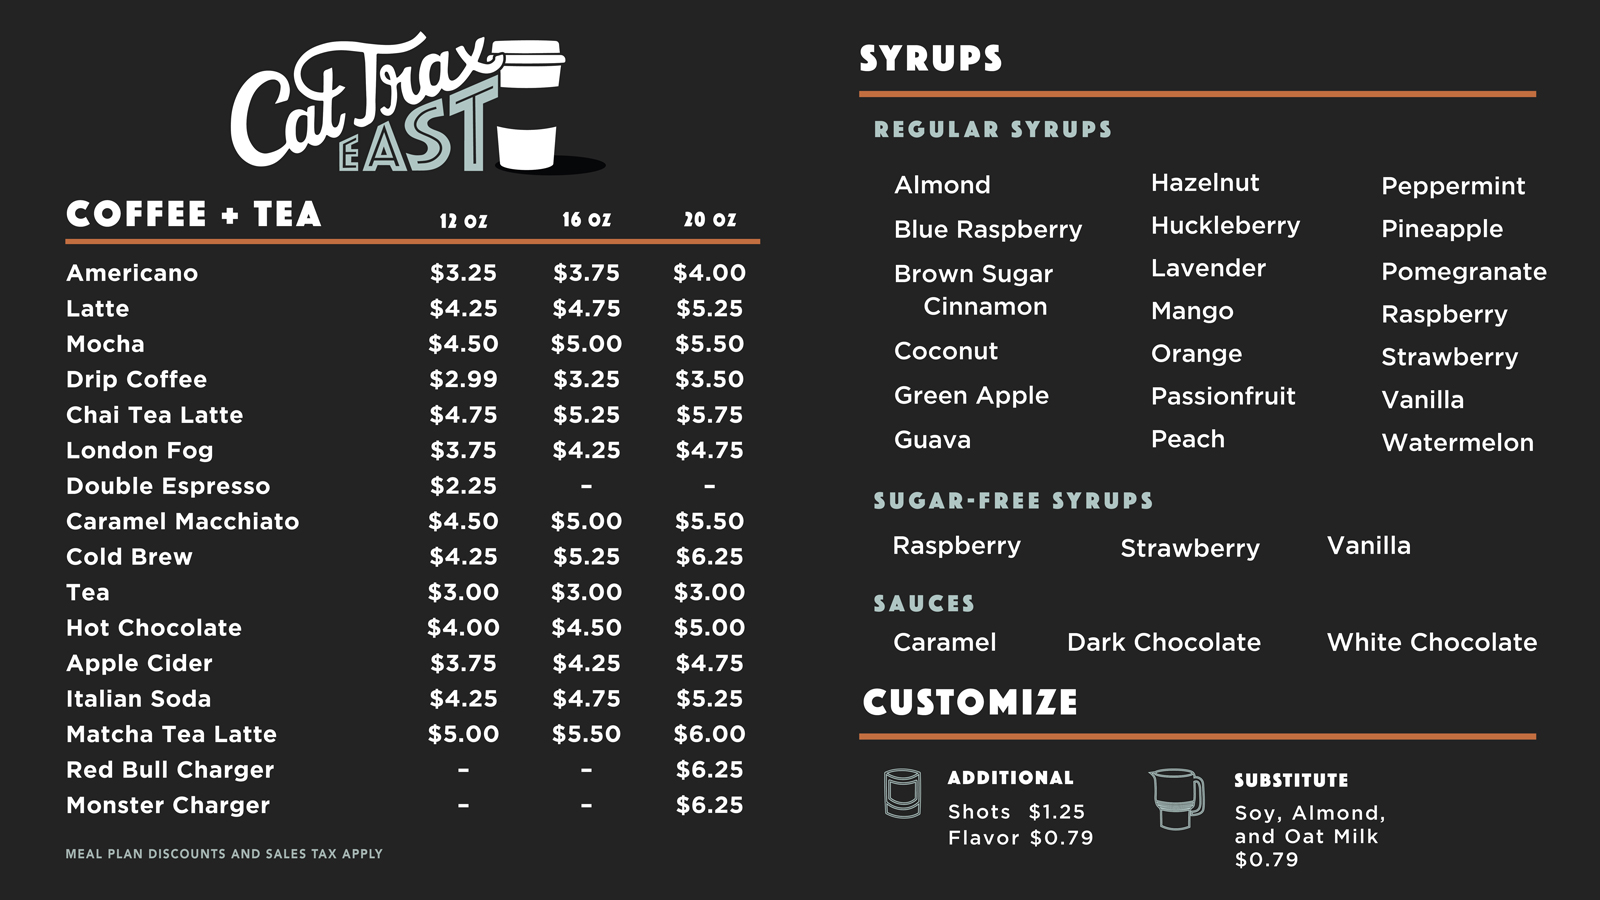 The Menu board for cat trax east